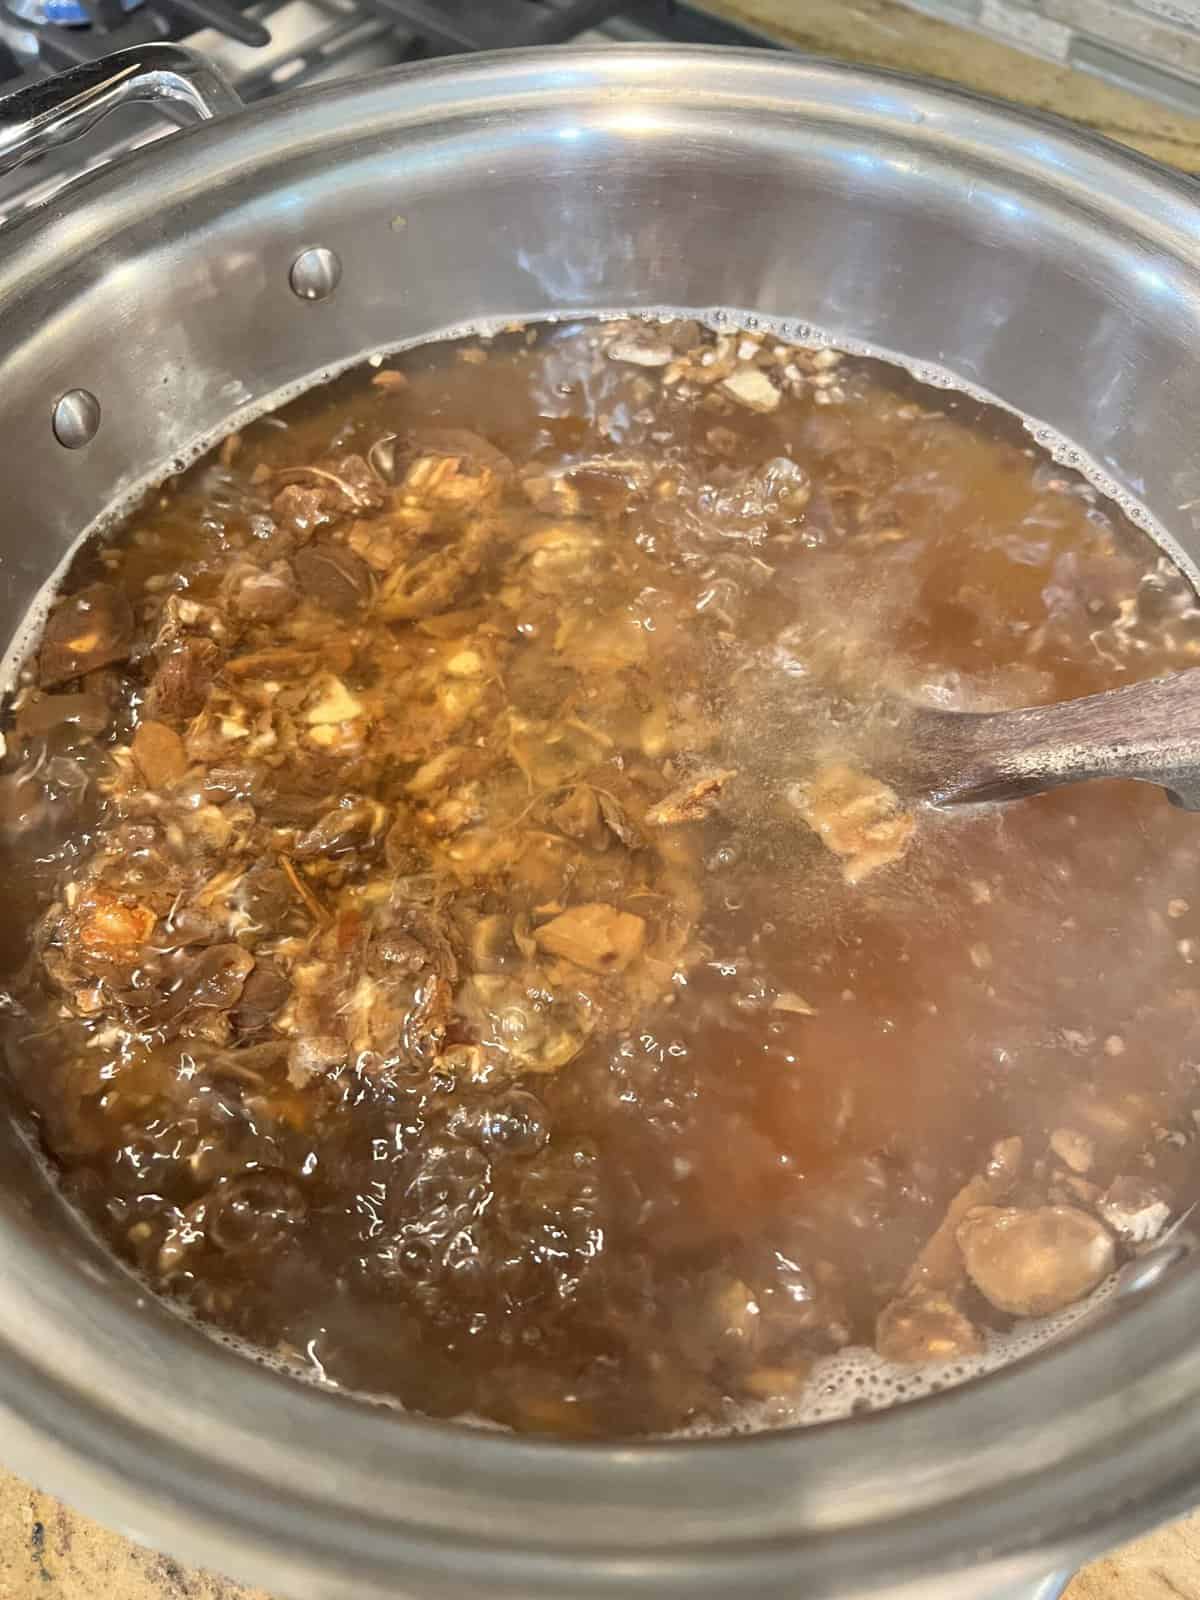 tamarind soaking in a stainless steel pot.